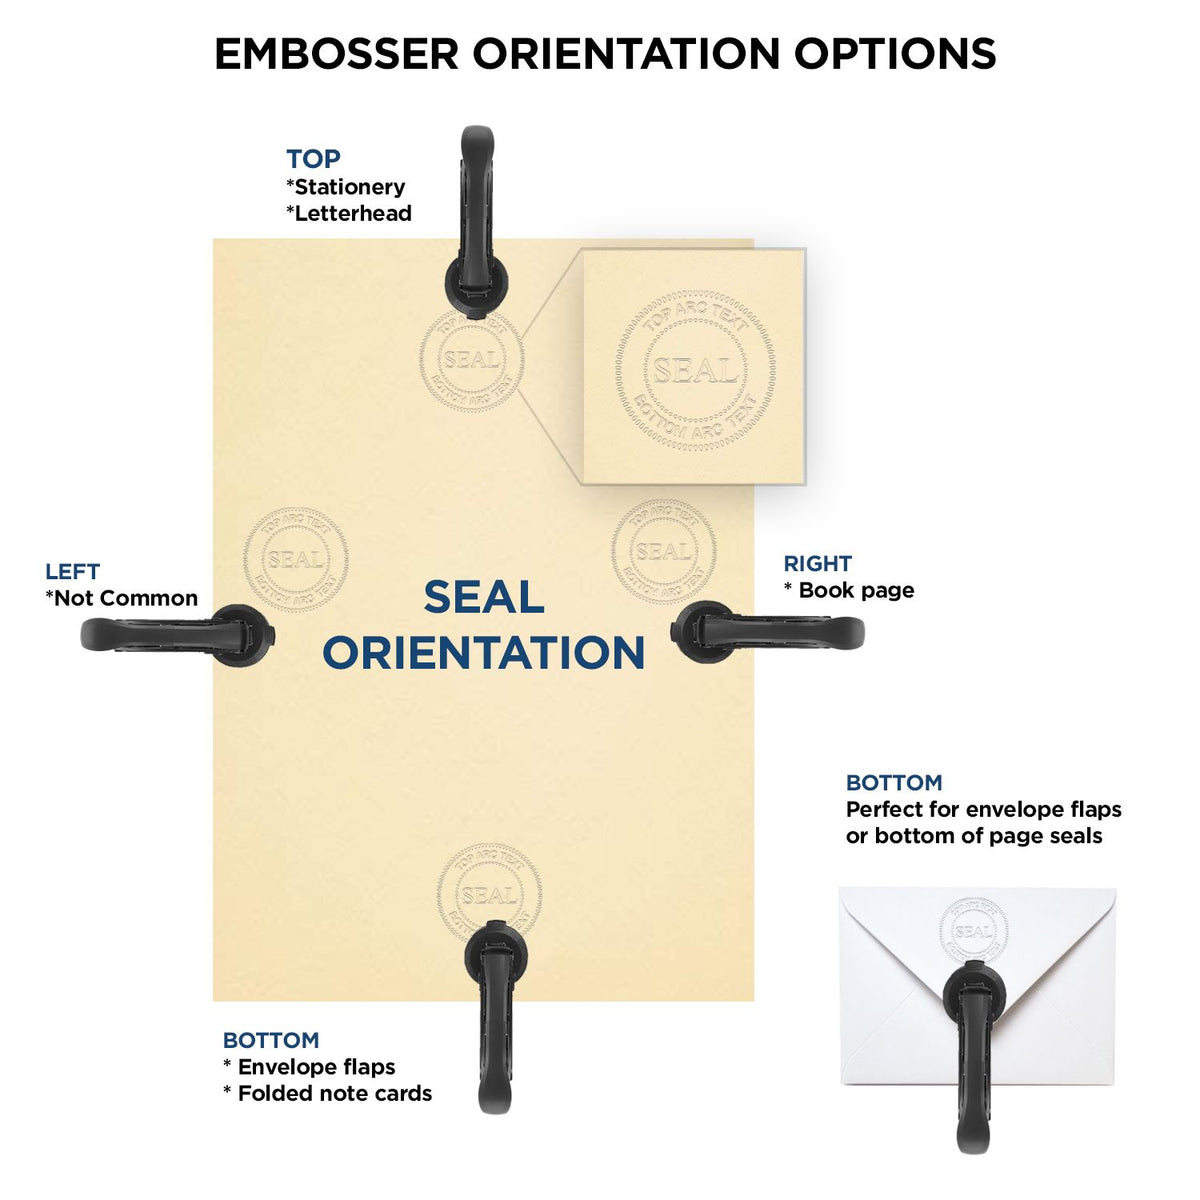 An infographic for the Handheld Georgia Architect Seal Embosser showing embosser orientation, this is showing examples of a top, bottom, right and left insert.